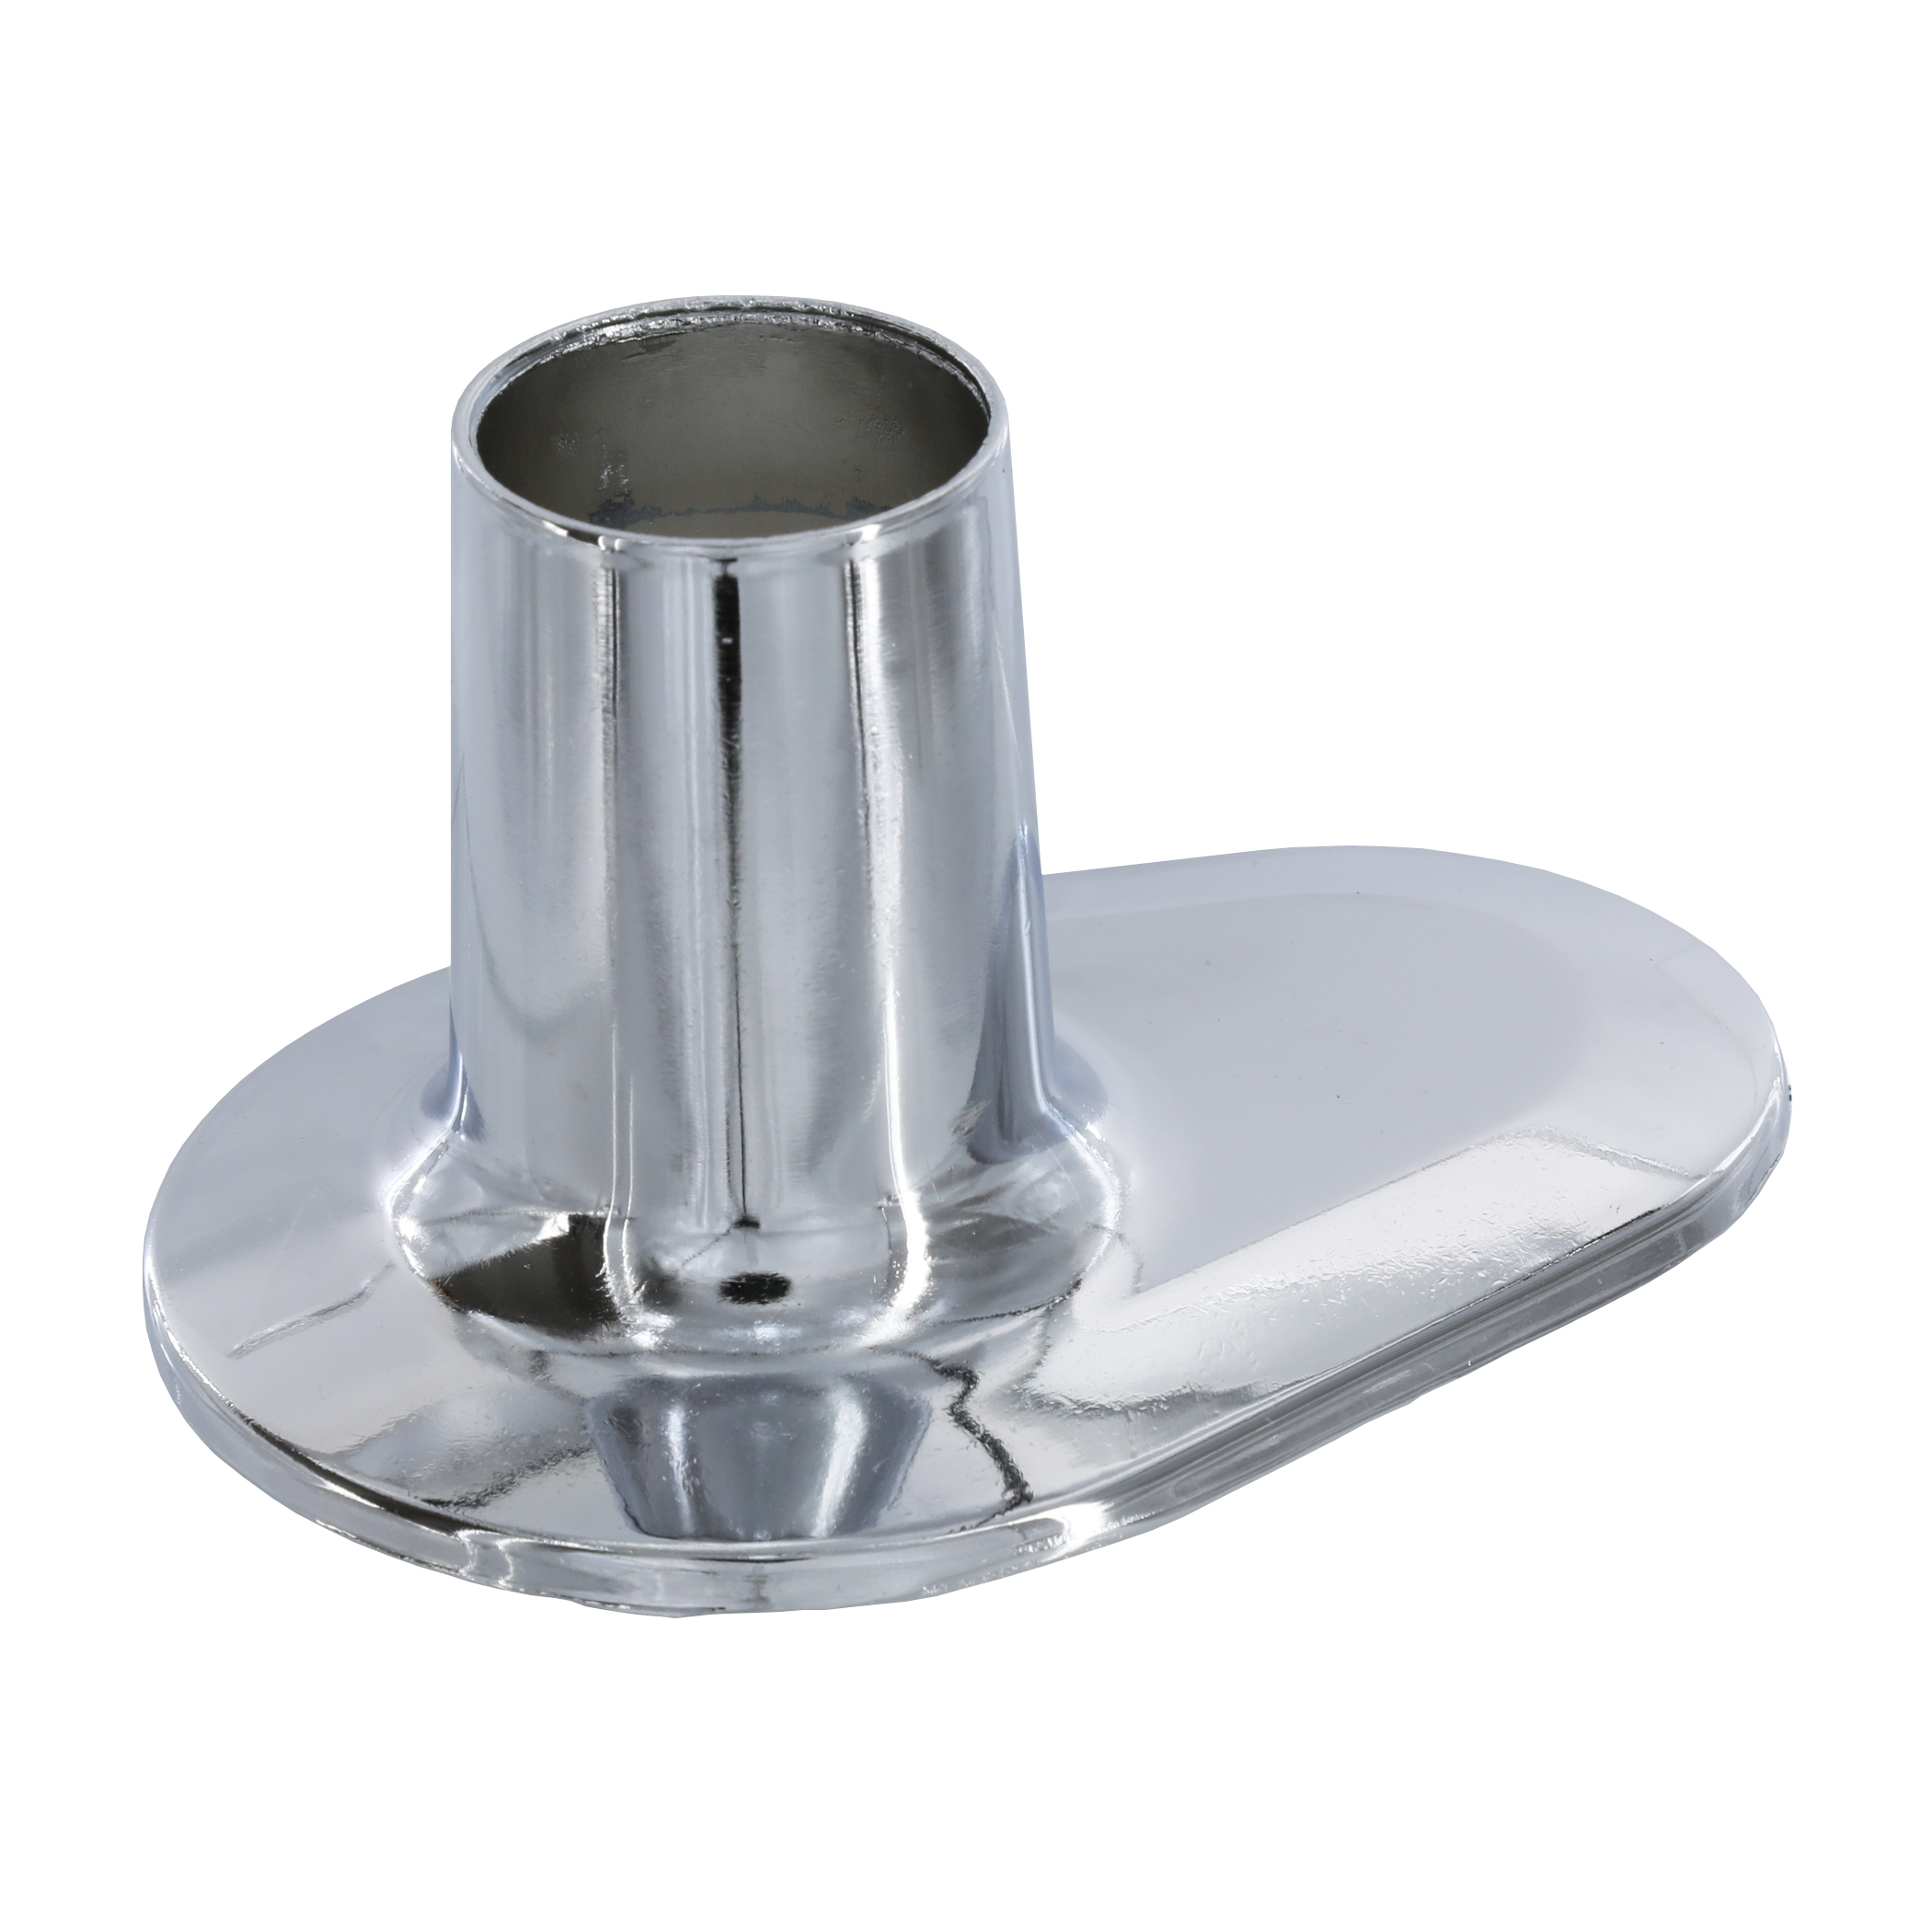 1-1/16 in. Flange for Pfister Tub/Shower Faucets